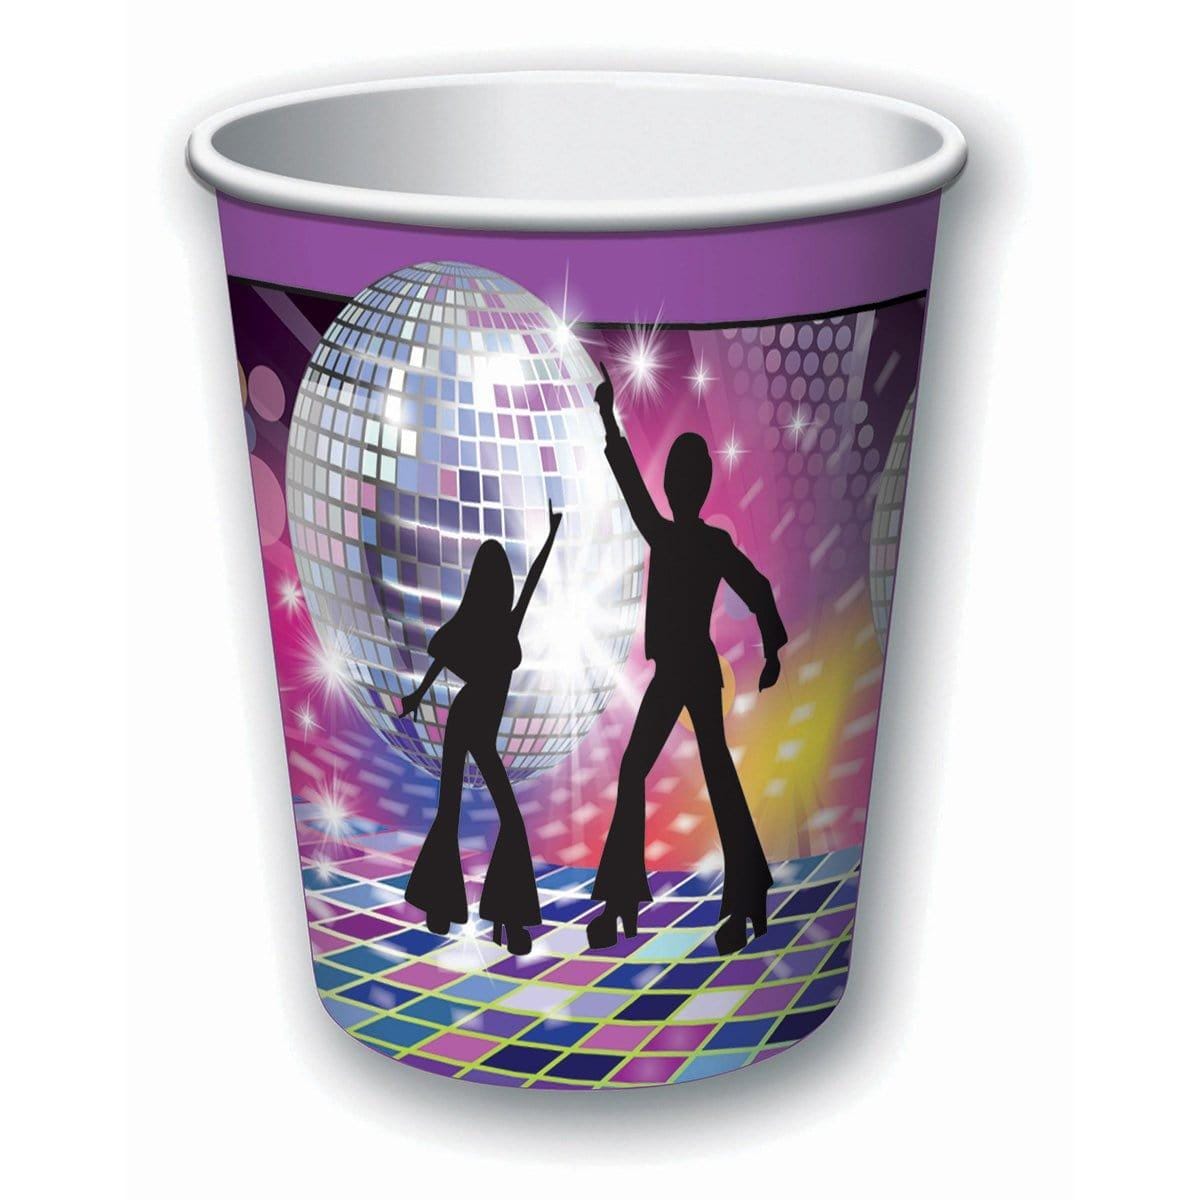 Buy Theme Party Disco Fever Paper Cups 9 Ounces, 8 per Package sold at Party Expert